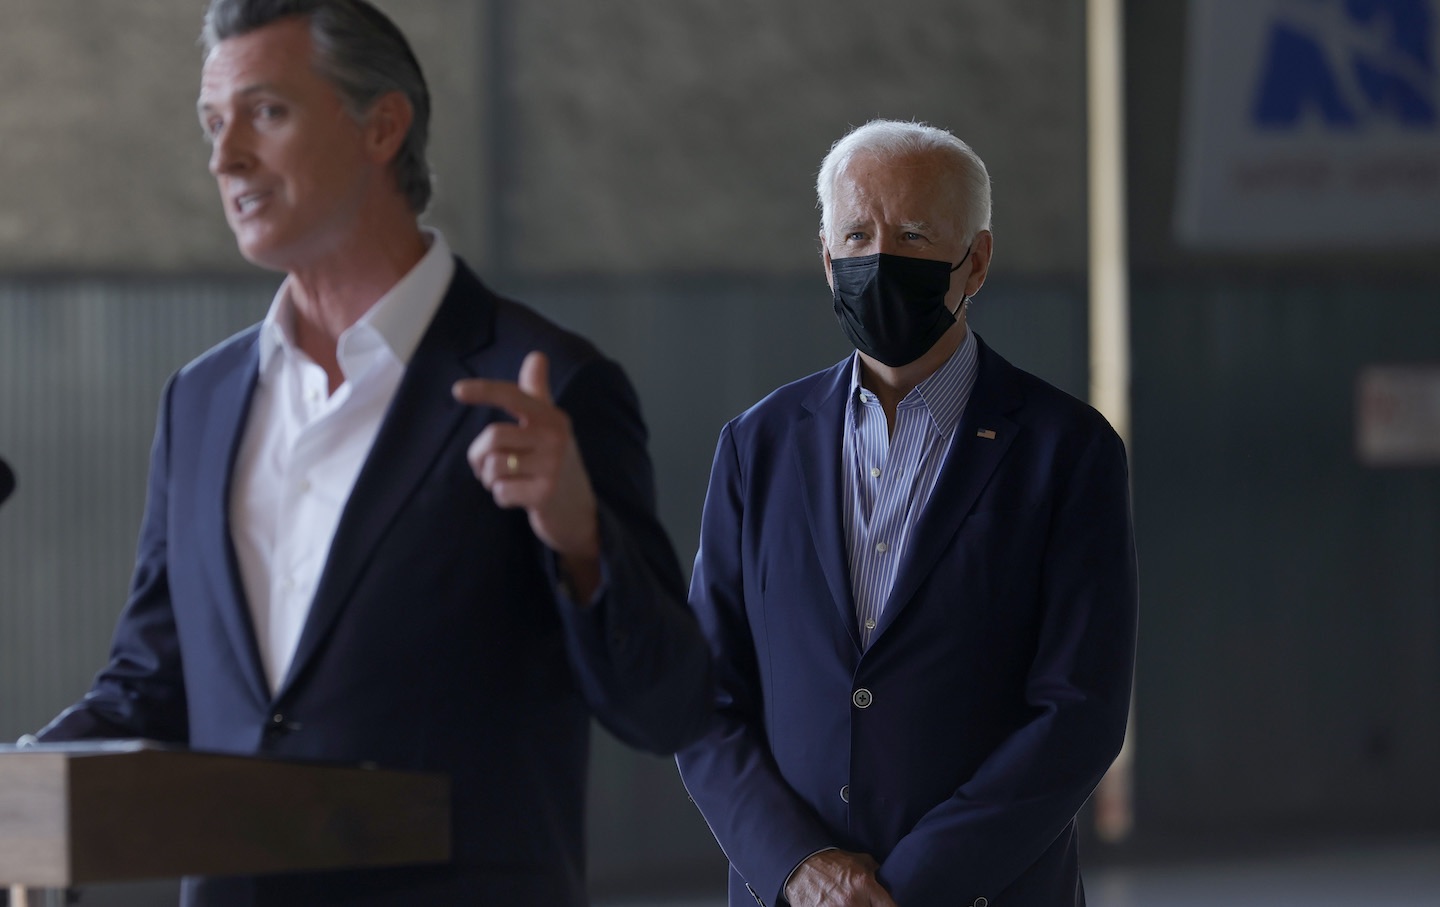 President Biden Delivers Remarks In Sacramento While In Region To View Areas Devastated By Wildfires